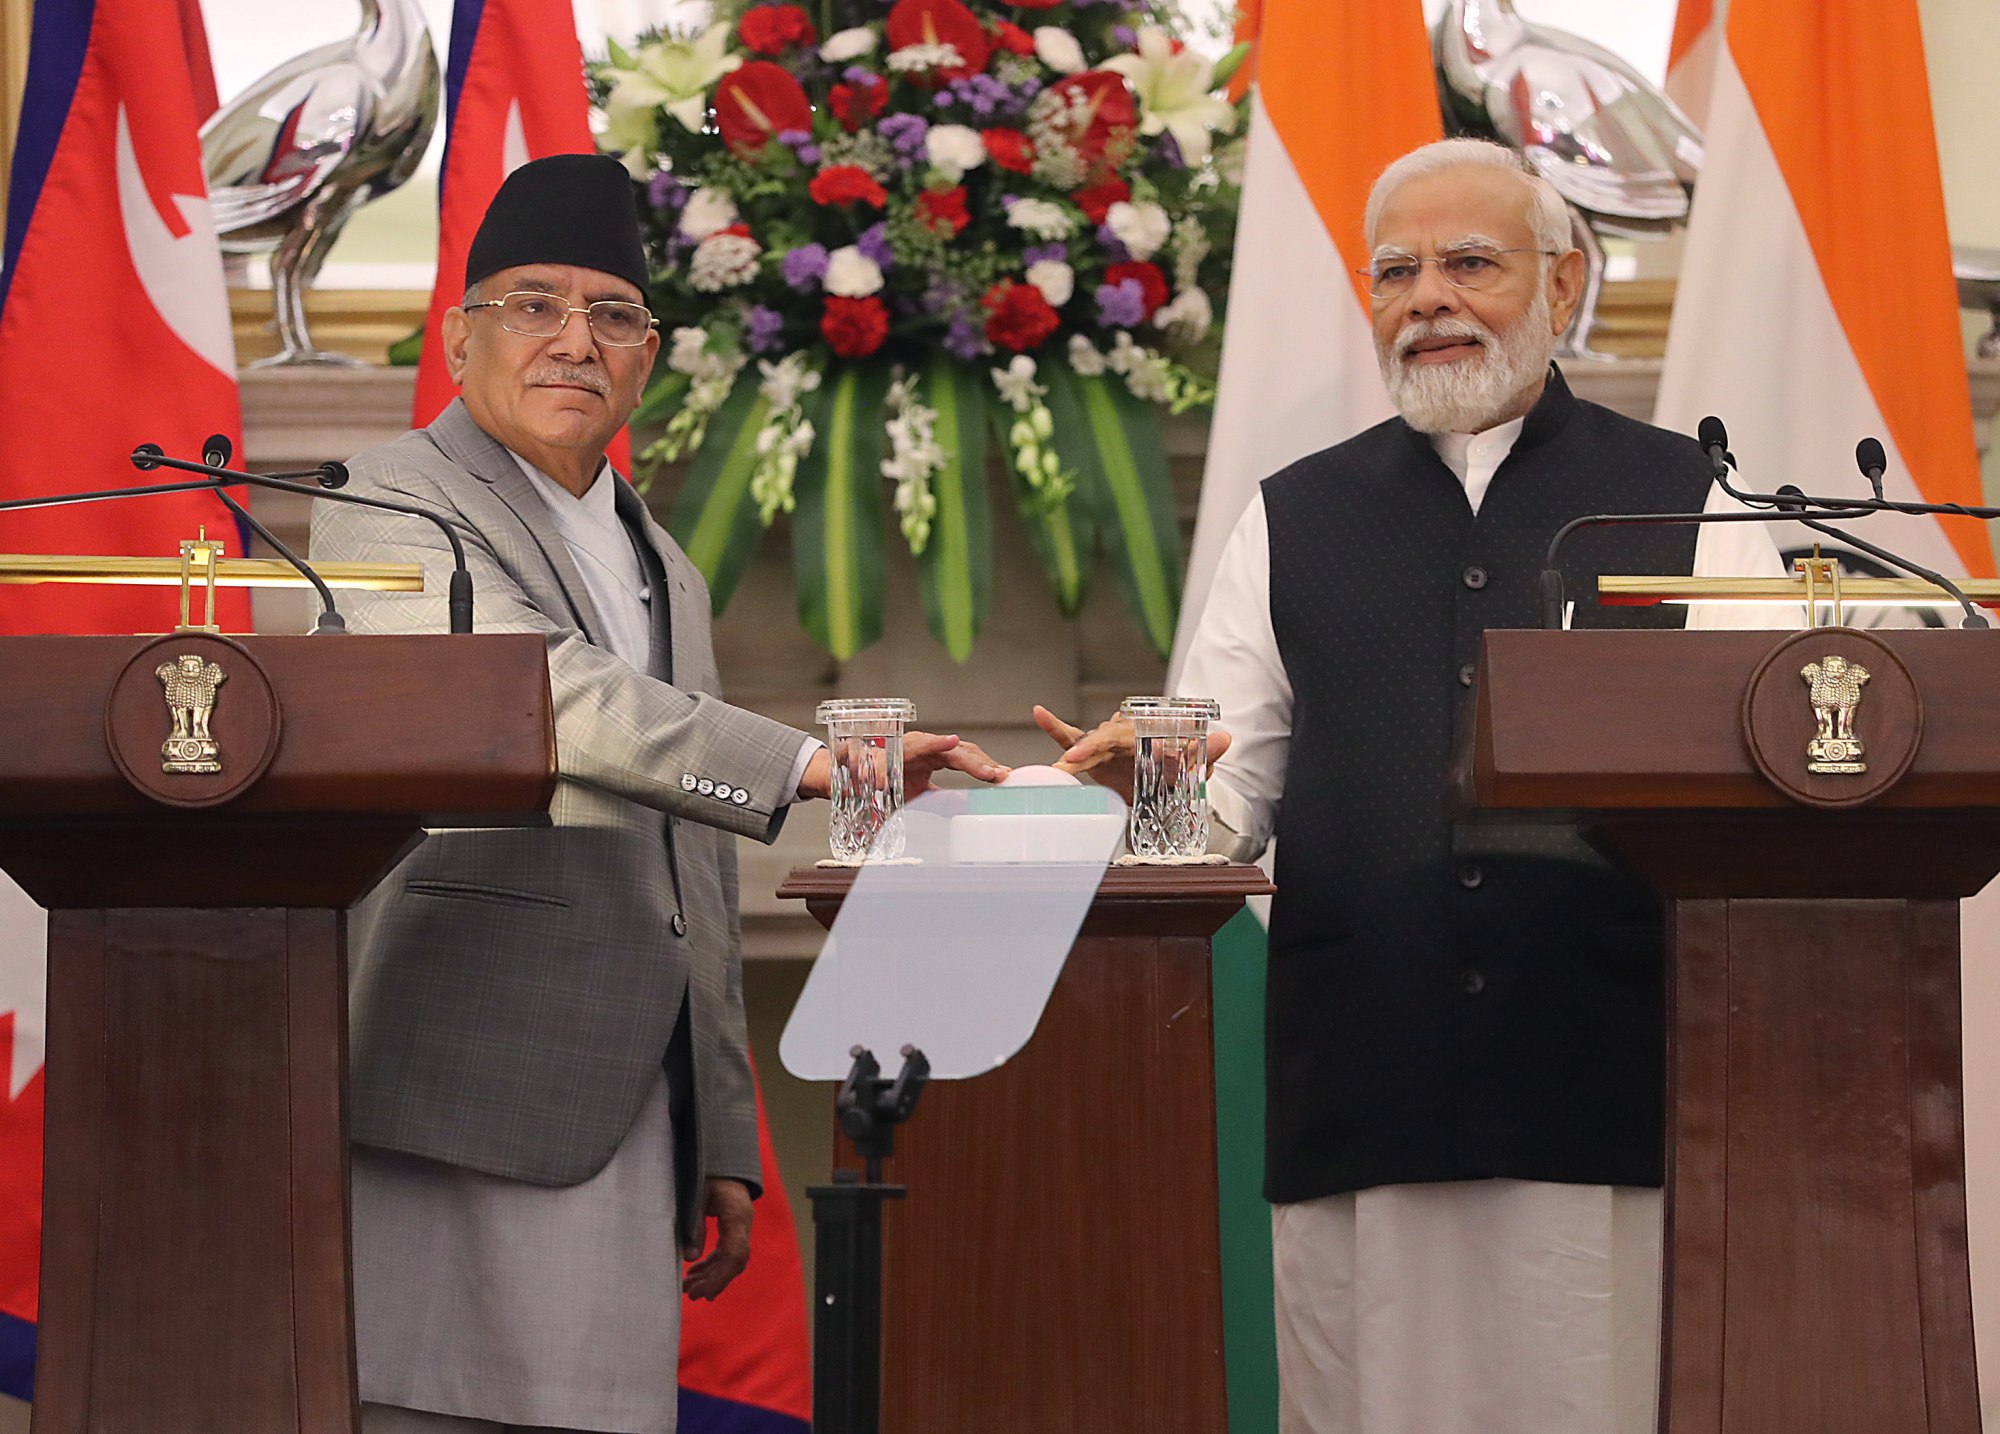 Nepal’s Prime Minister Pushpa Kamal Dahal (left) and Indian Prime Minister Narendra Modi (right) press a button to inaugurate the freight rail operation between India and Nepal during their meeting at Hyderabad House, in New Delhi on June 1, 2023. Photo: EPA-EFE